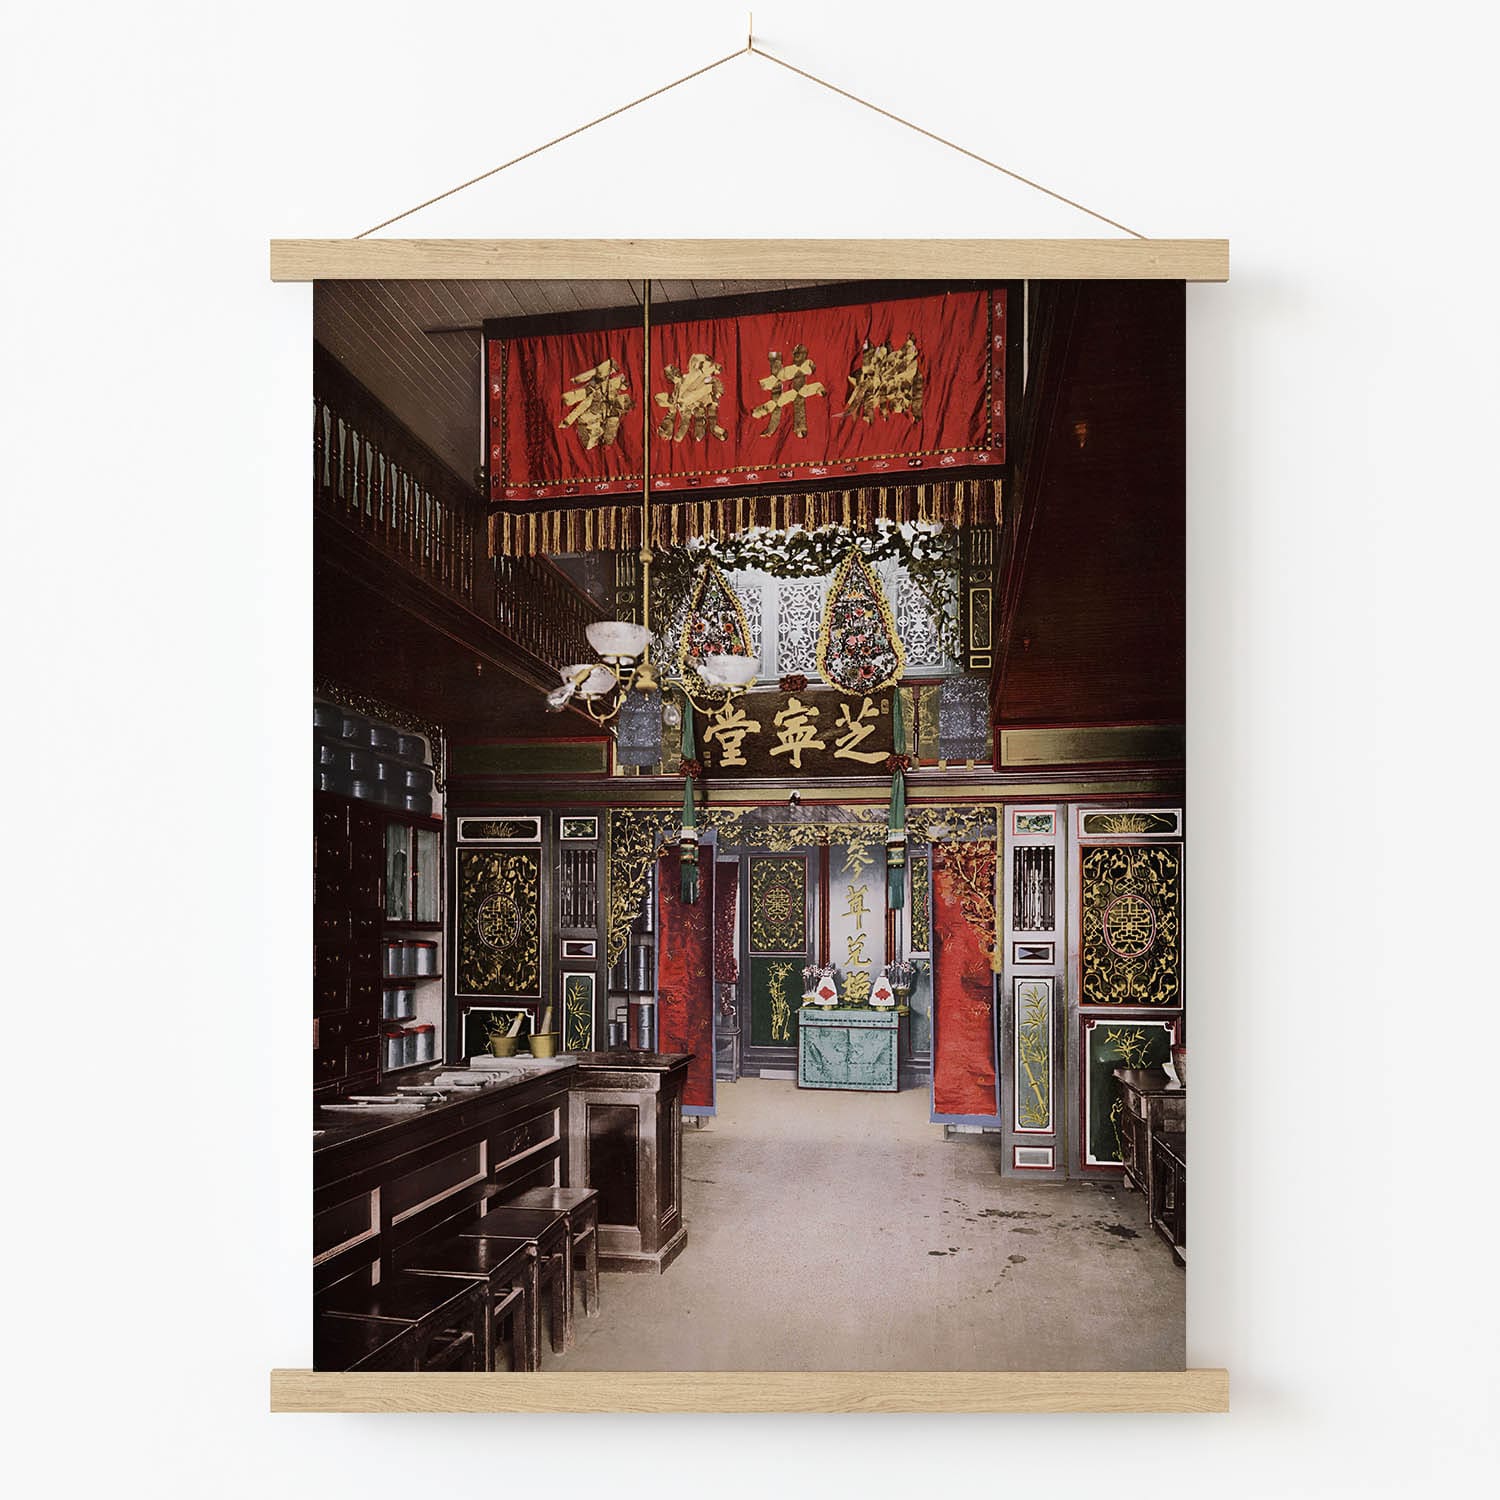 Vintage Chinese Shop Art Print in Wood Hanger Frame on Wall